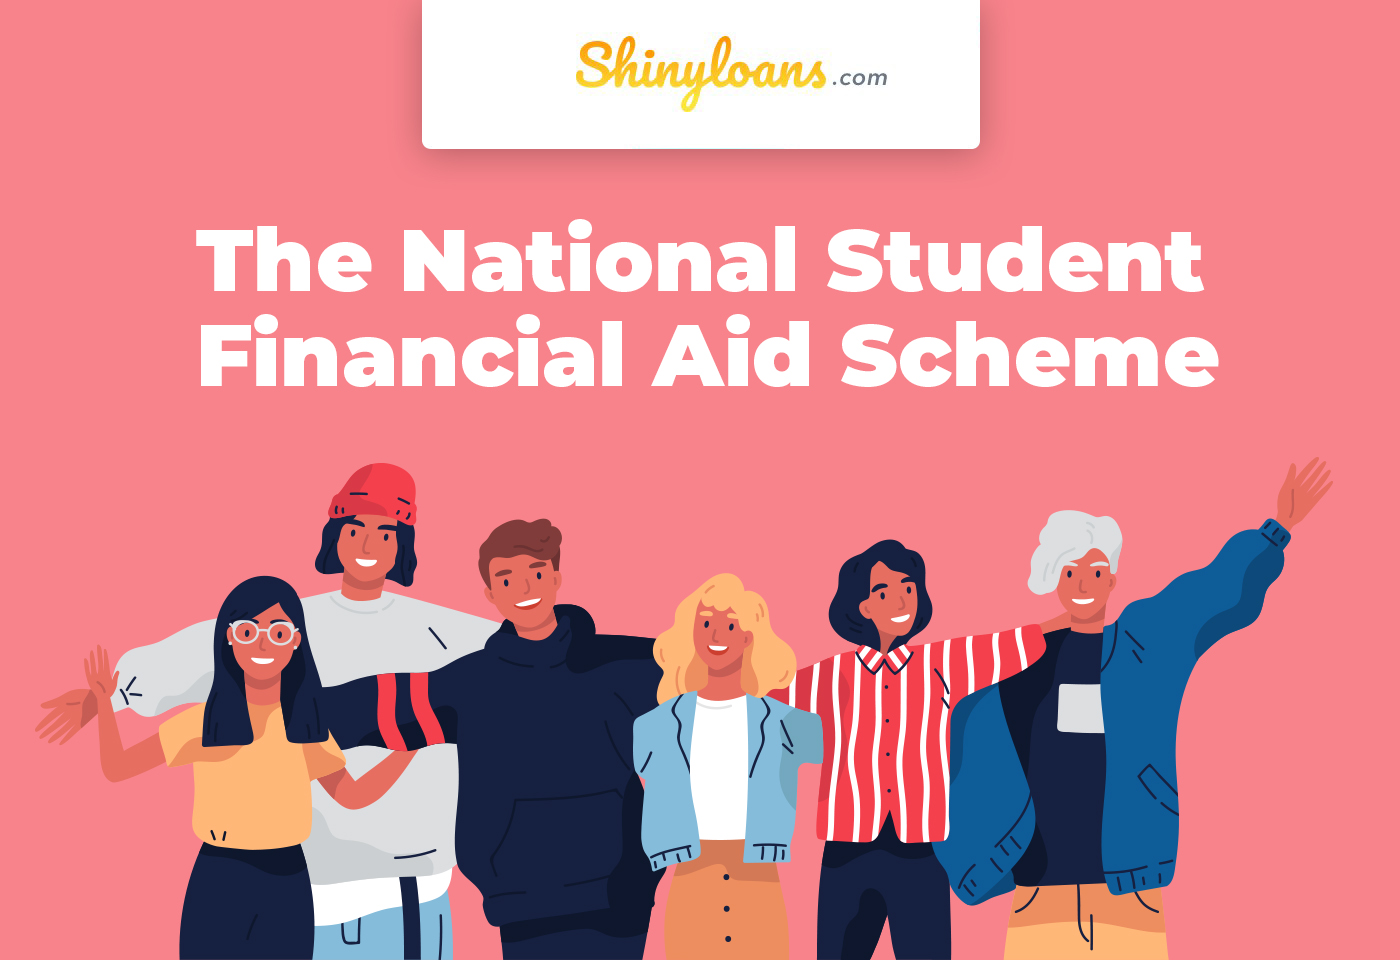 The National Student Financial Aid Scheme